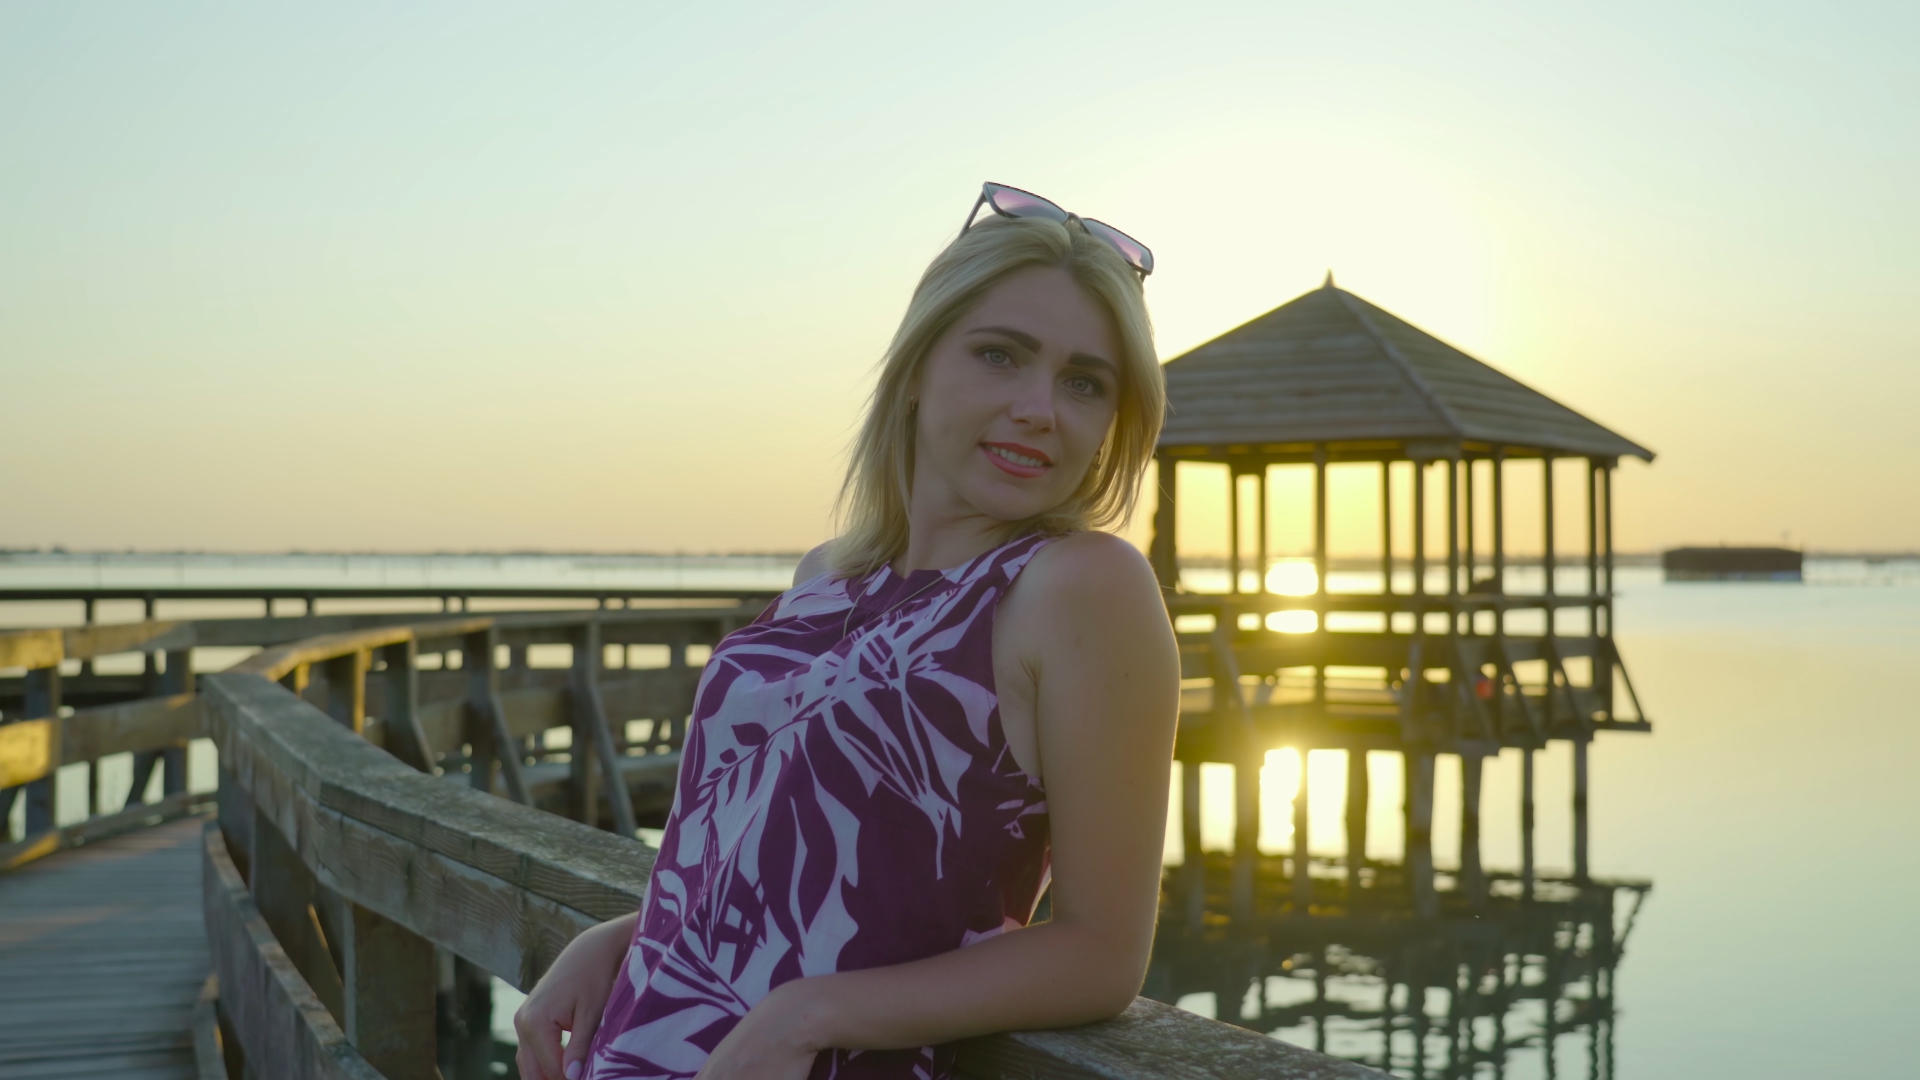 Blond woman smiles looking into camera at sunset